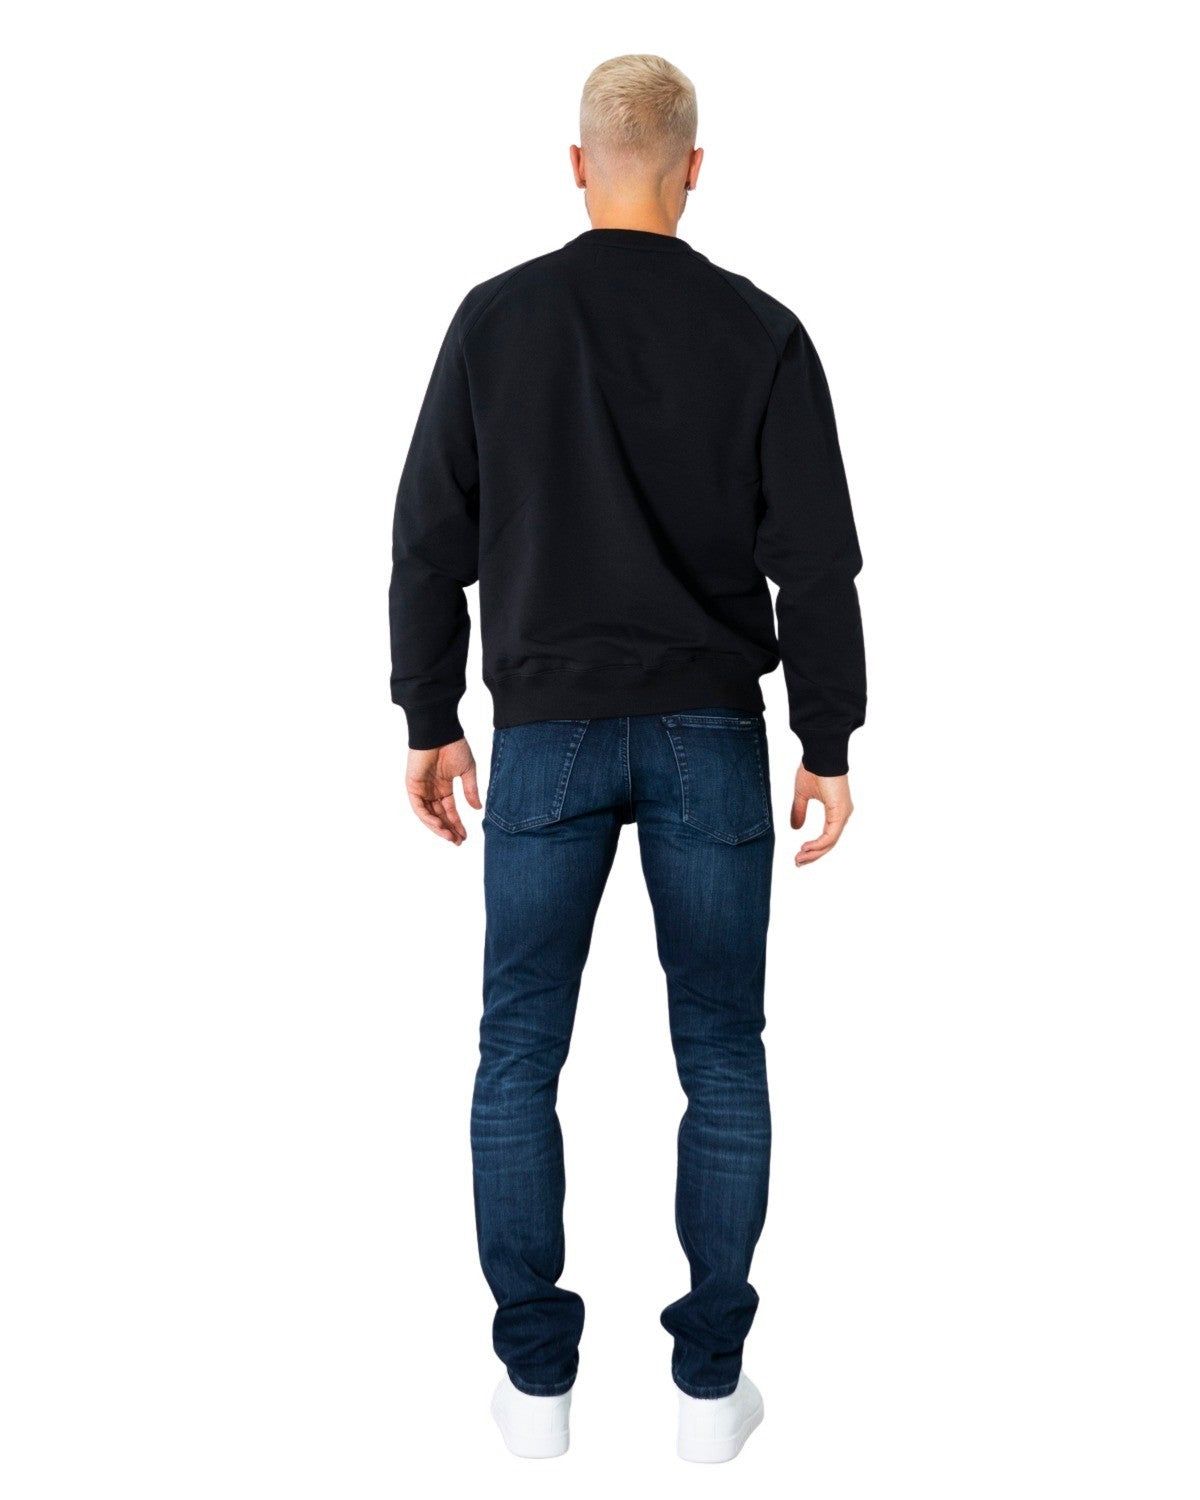 Brand: Calvin Klein Jeans Gender: Men Type: Sweatshirts Season: Fall/Winter  PRODUCT DETAIL • Color: black • Sleeves: long • Neckline: round neck  COMPOSITION AND MATERIAL • Composition: -95% cotton -5% elastane  •  Washing: machine wash at 30° -95% Cotton -5% Elastane